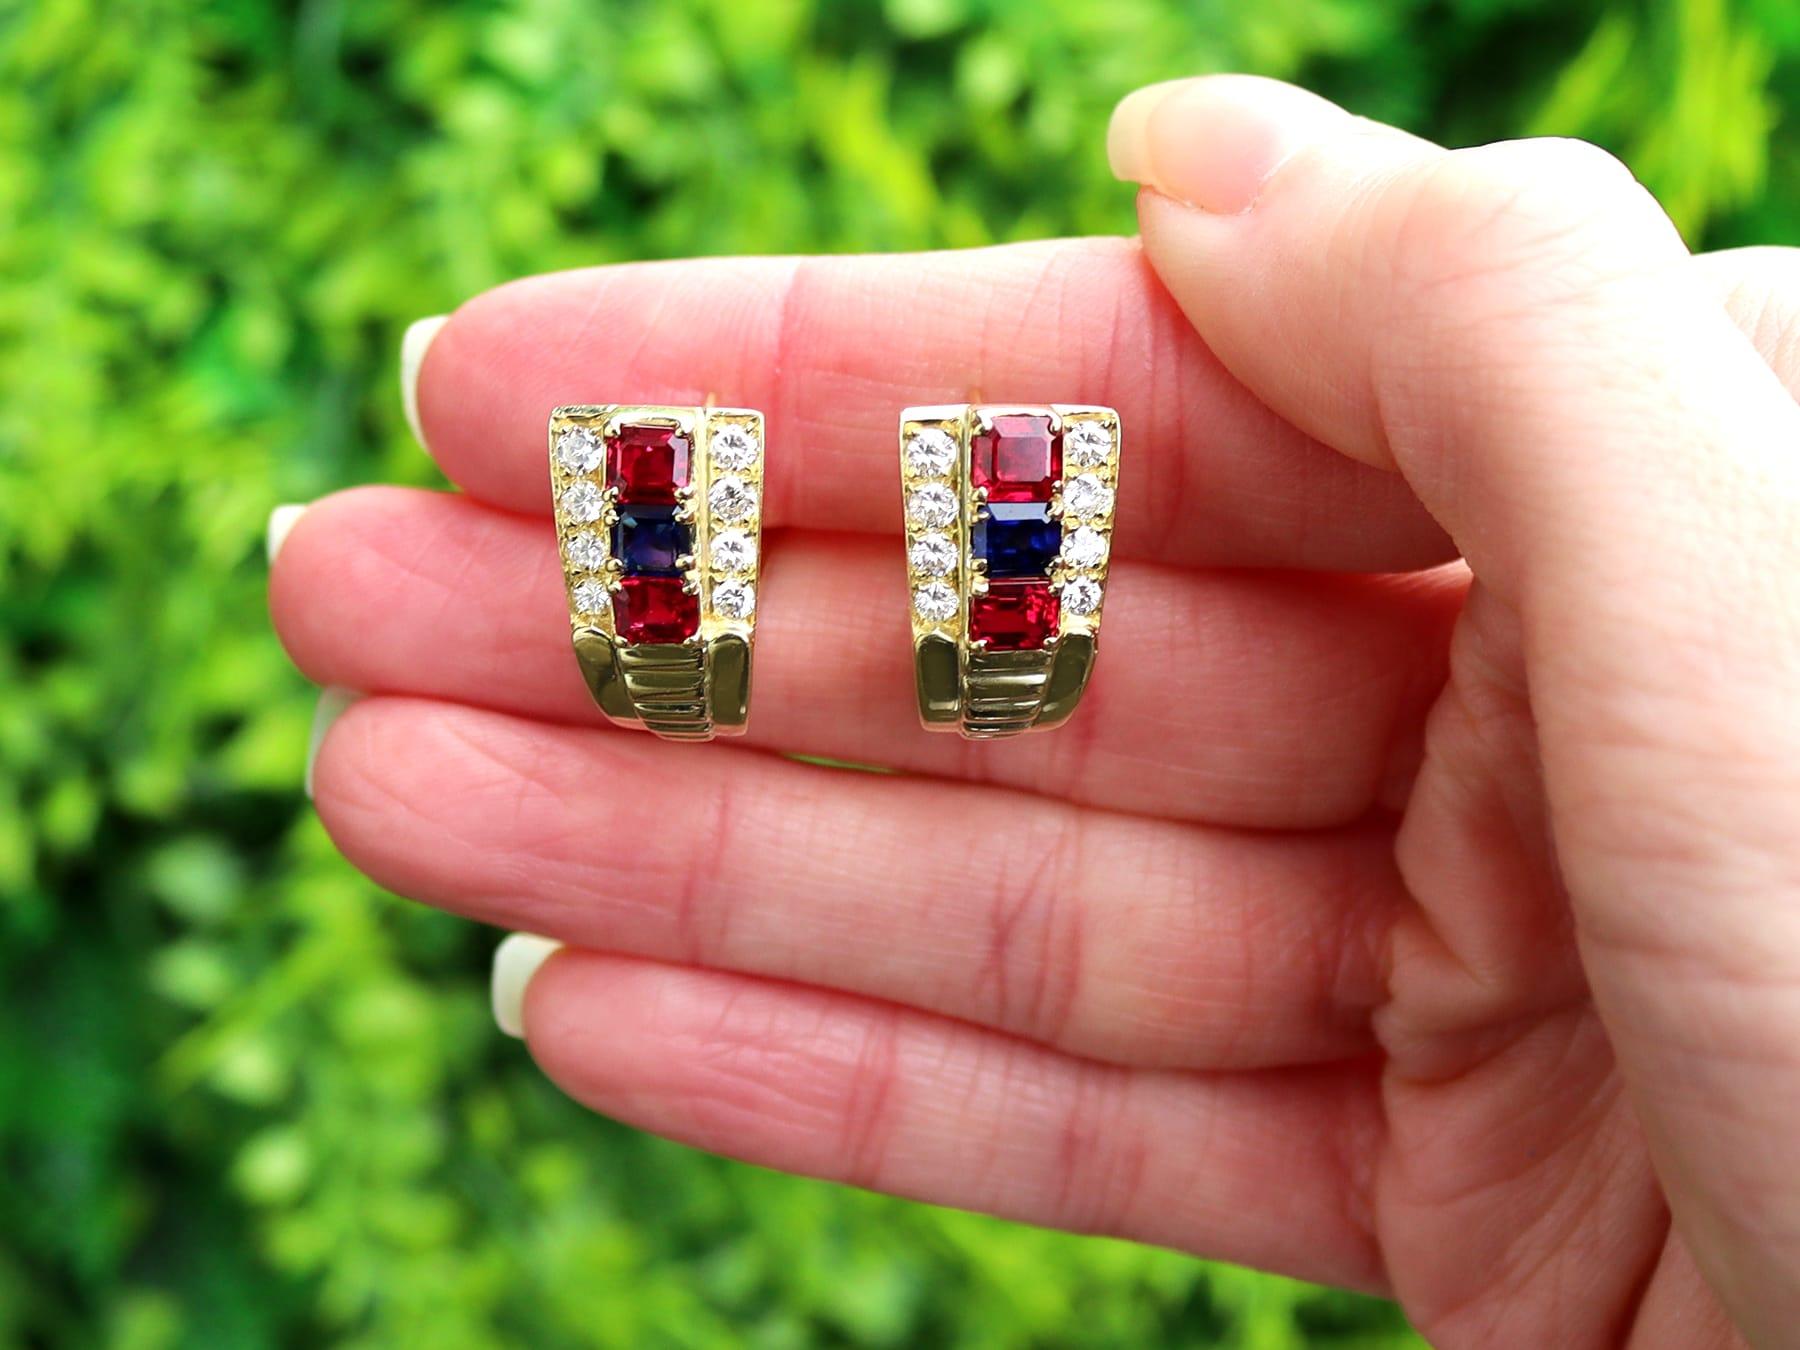 A stunning, fine and impressive pair of vintage 0.92 carat ruby and 0.65 carat sapphire, 0.64 carat diamond and 18 karat yellow gold earrings by Bulgari / Bvlgari; part of our diverse gemstone jewelry collections.

These fine and impressive